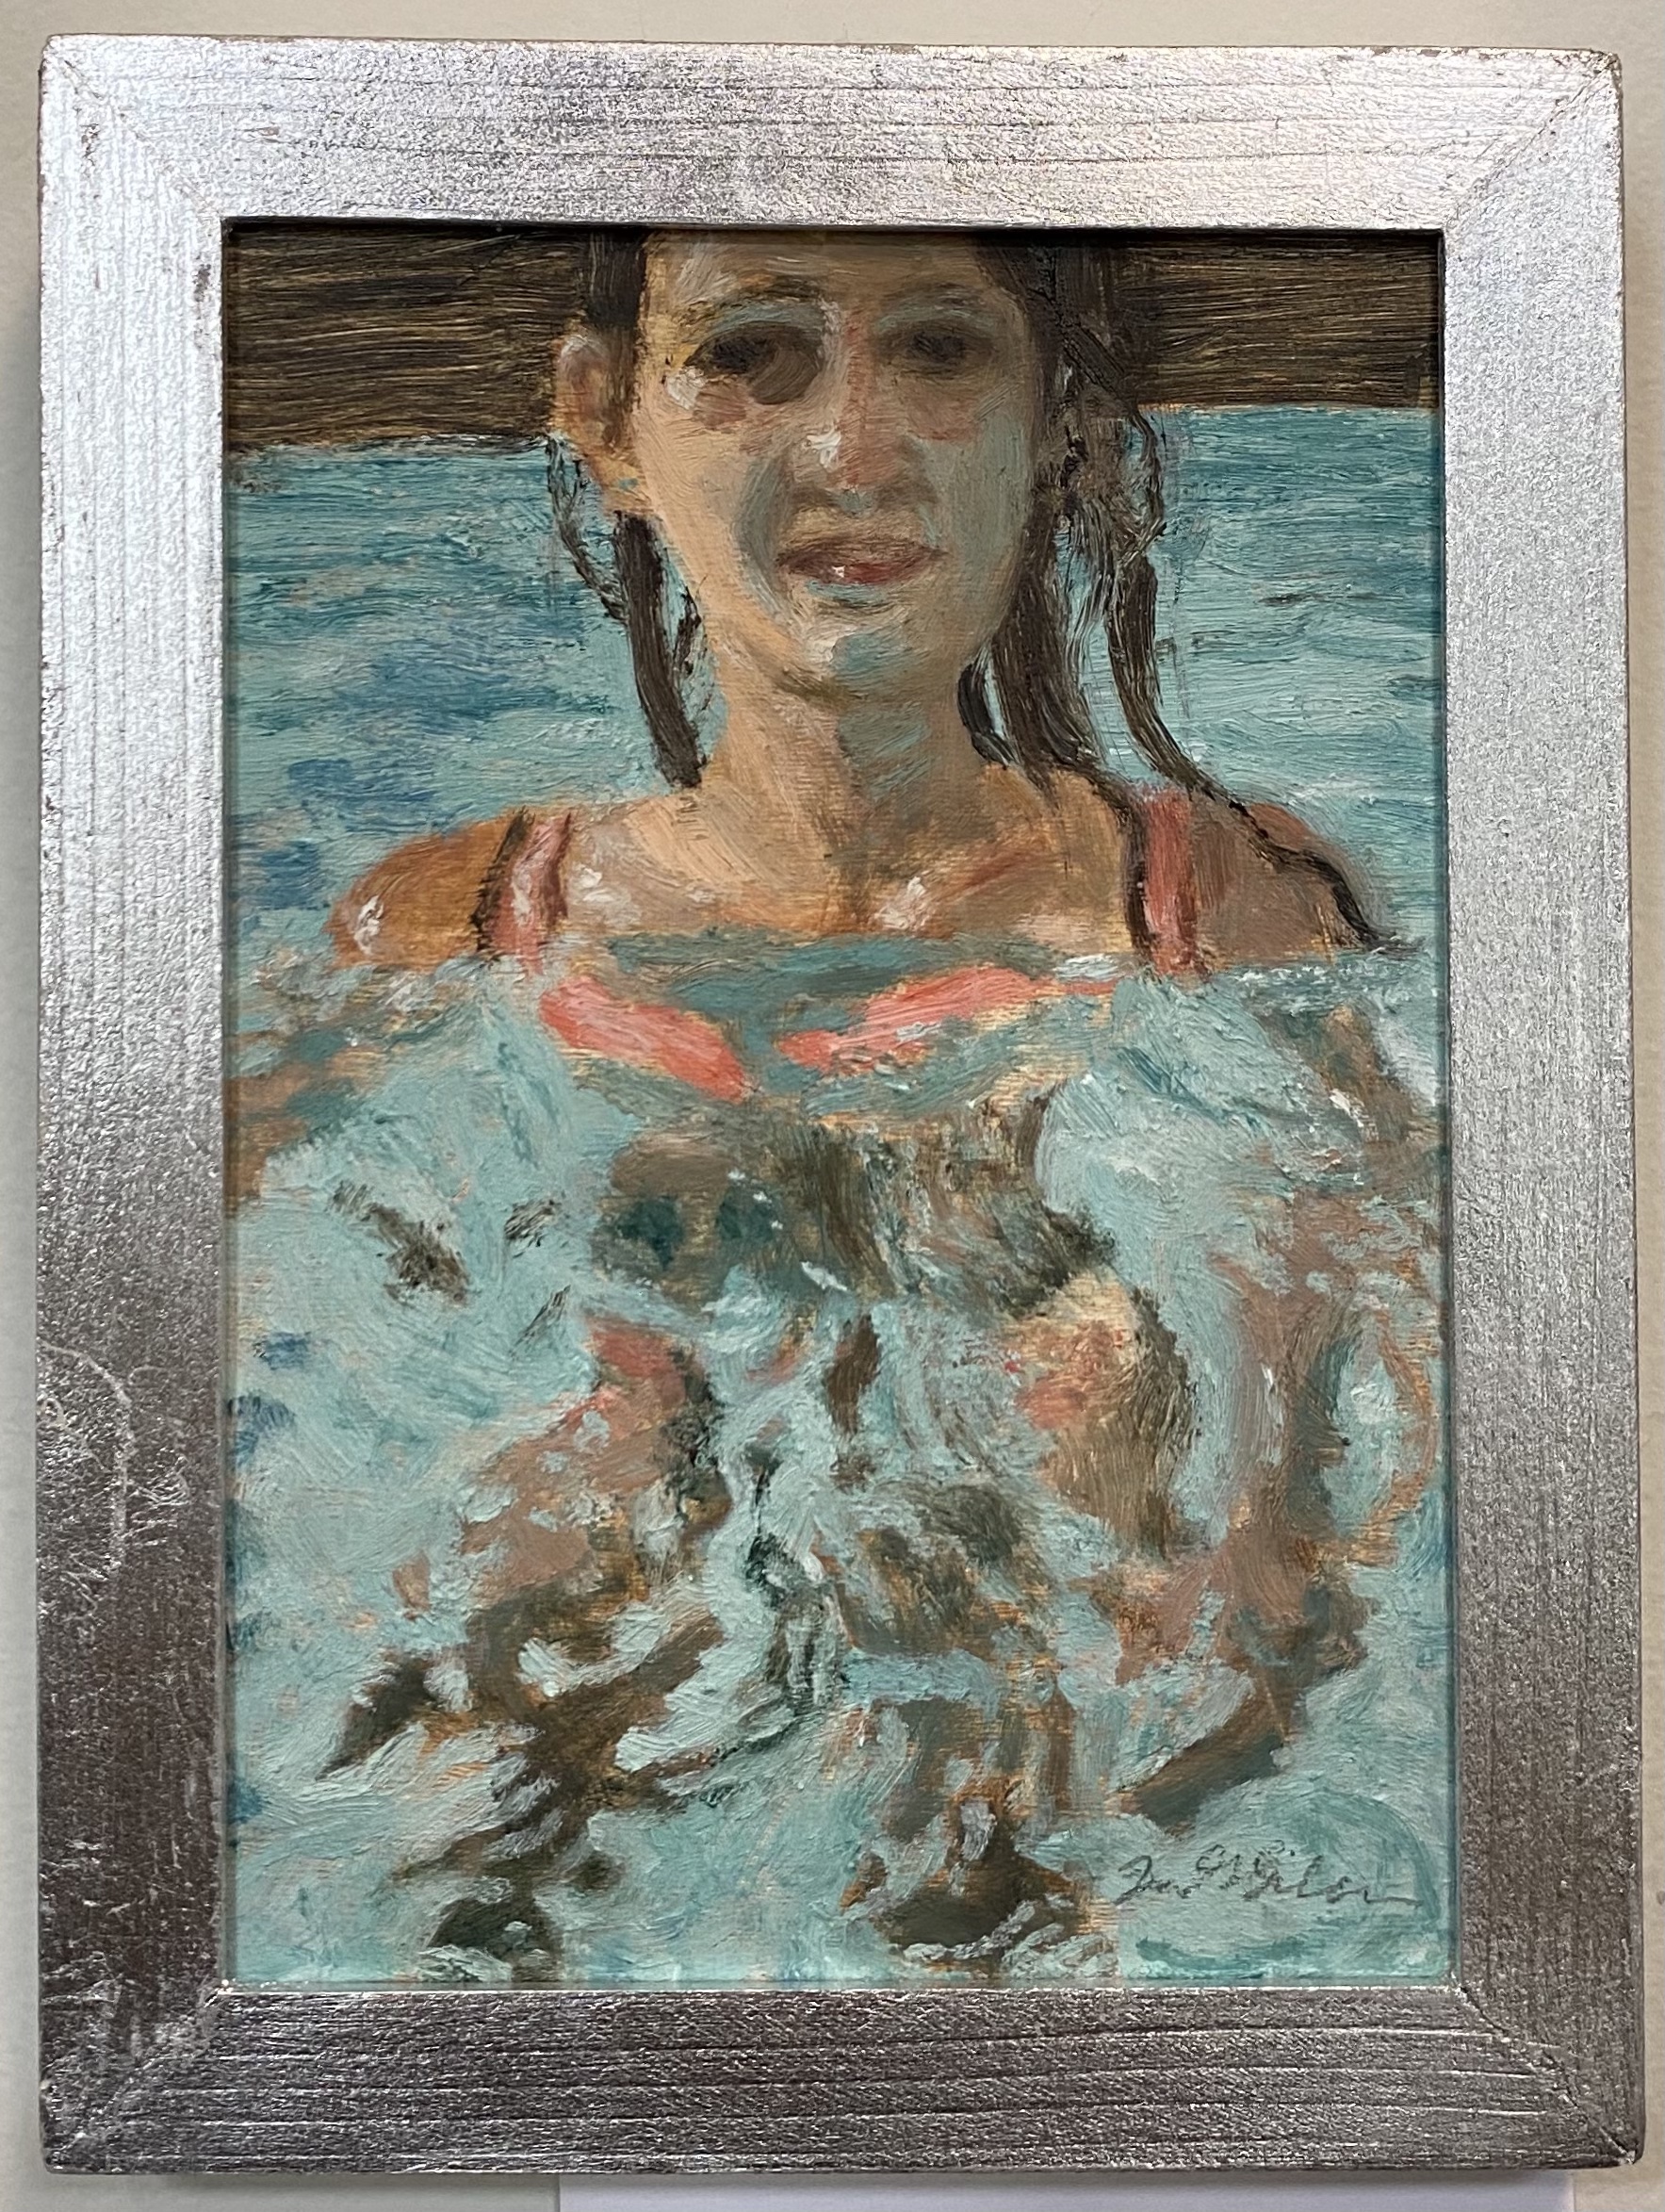 Water is a Metaphor for Love #3, 
Treading
Oil on board
5” x 7”
$150.
